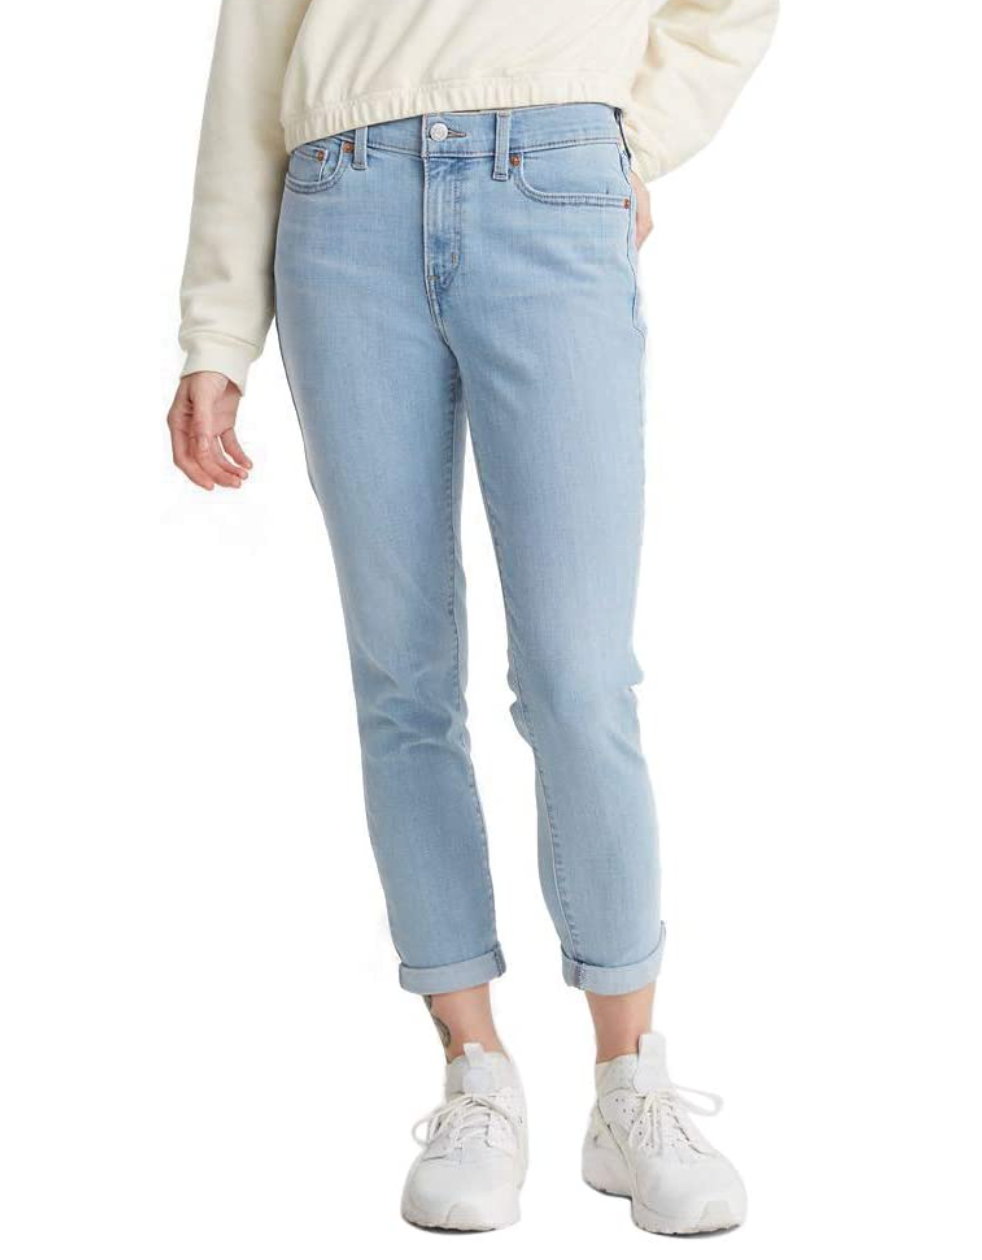 Shoppers Are Obsessed With Levi's New Boyfriend Jeans And They're